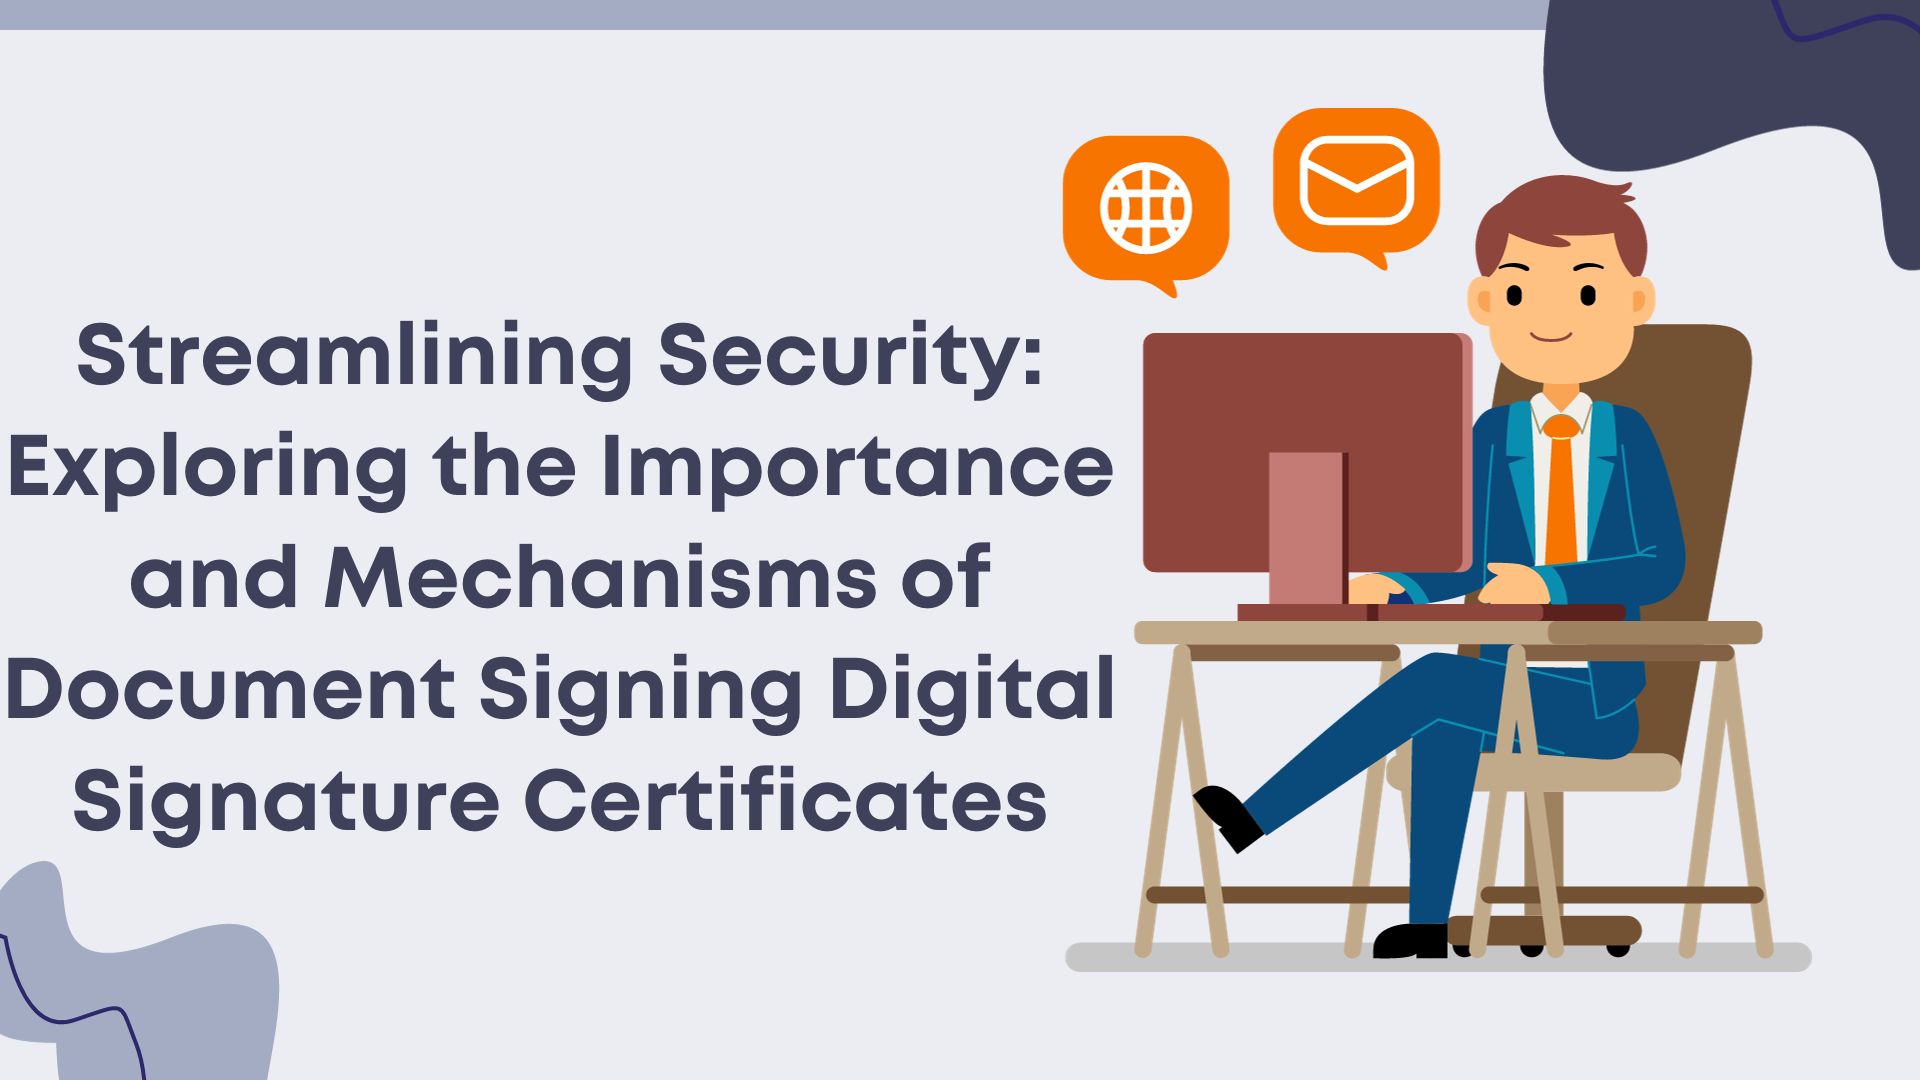 Streamlining Security: Exploring the Importance and Mechanisms of Document Signing Digital Signature Certificates